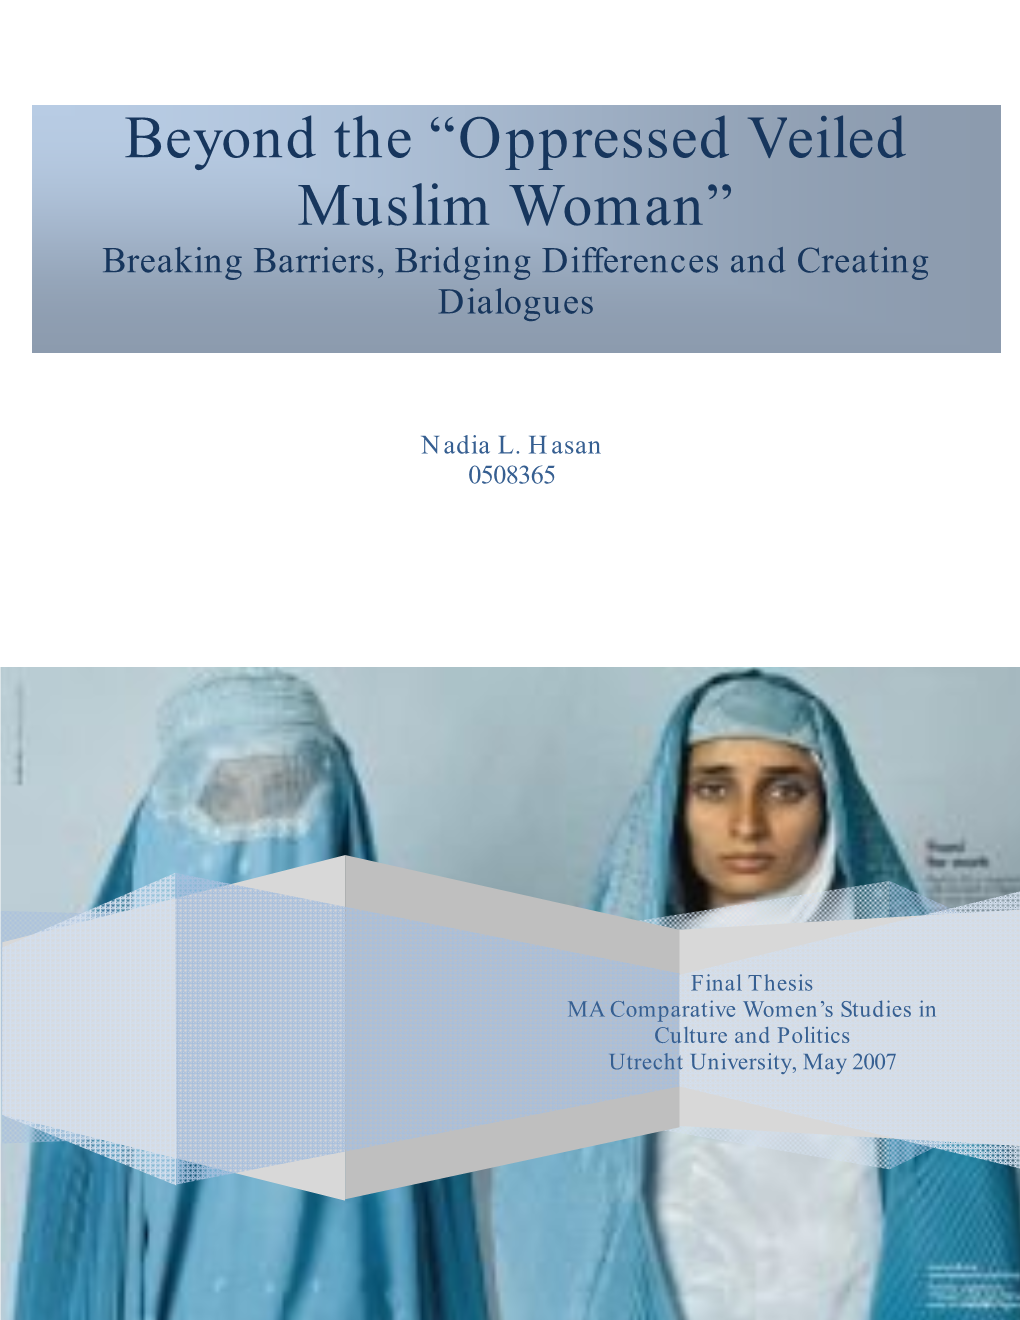 Oppressed Veiled Muslim Woman” Breaking Barriers, Bridging Differences and Creating Dialogues